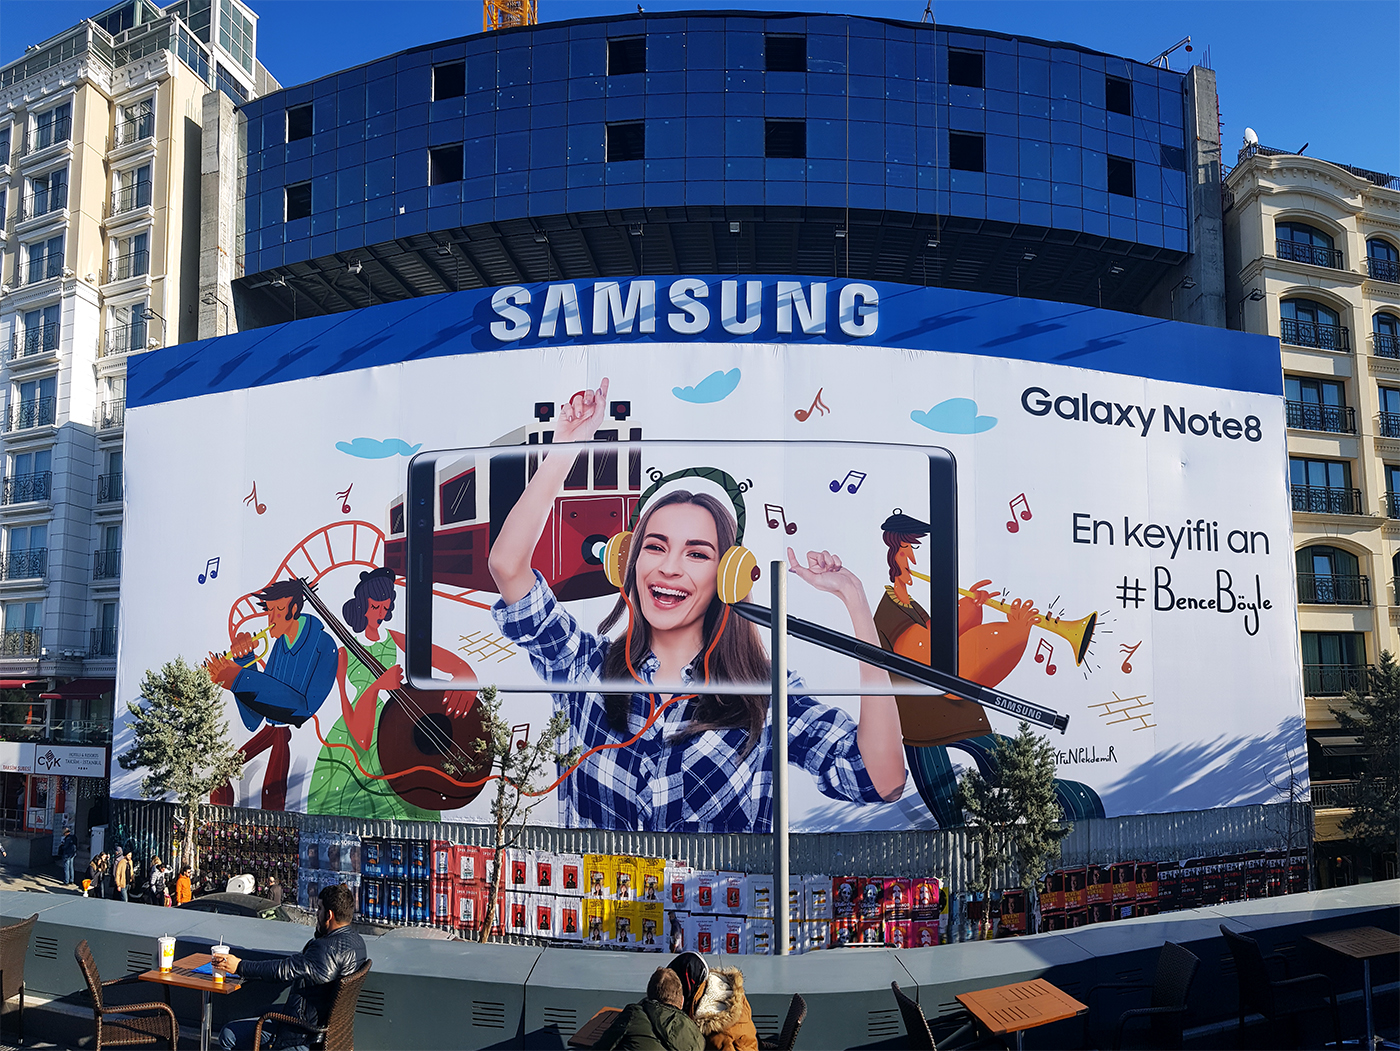 Samsung new ILLUSTRATION  featured Global istanbul Project campaign smart phone Note8